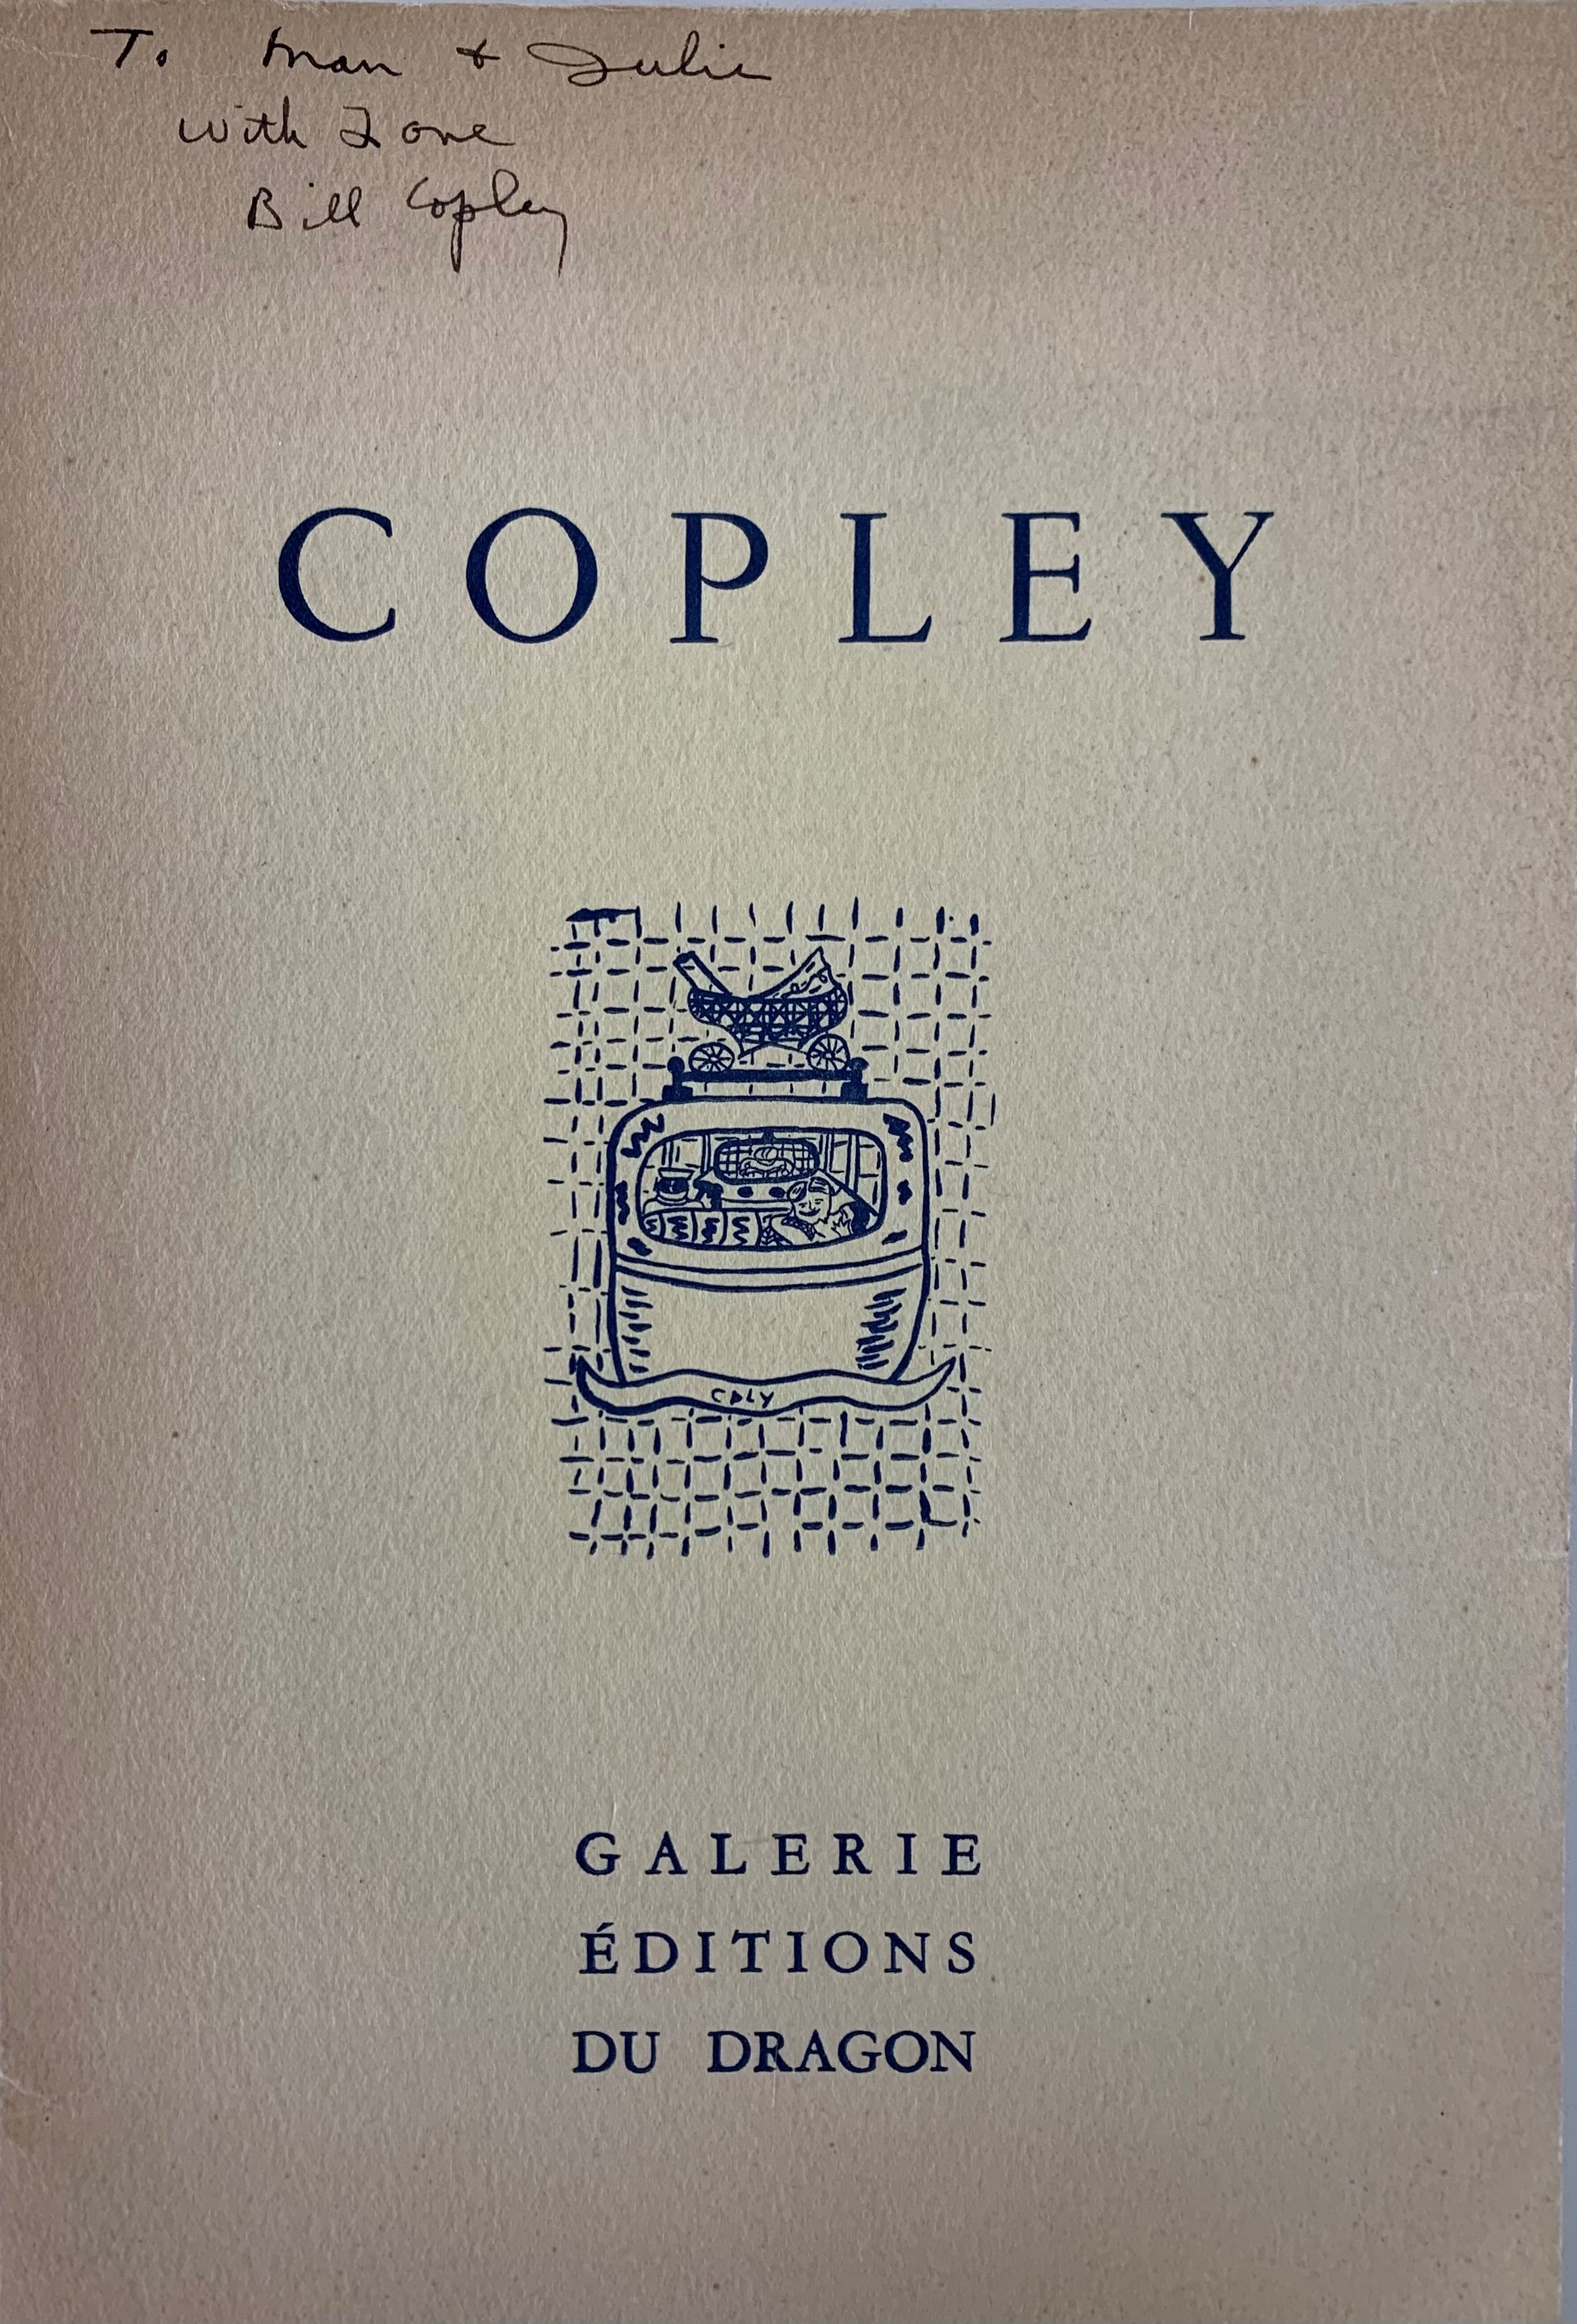 (COPLEY, WILLIAM AKA CPLY). Waldberg, Patrick - COPLEY: PEINTURES RECENTES - AN EXTRAORDINARY ASSOCIATION COPY INSCRIBED BY ARTIST WILLIAM COPLEY TO JULIET AND MAN RAY